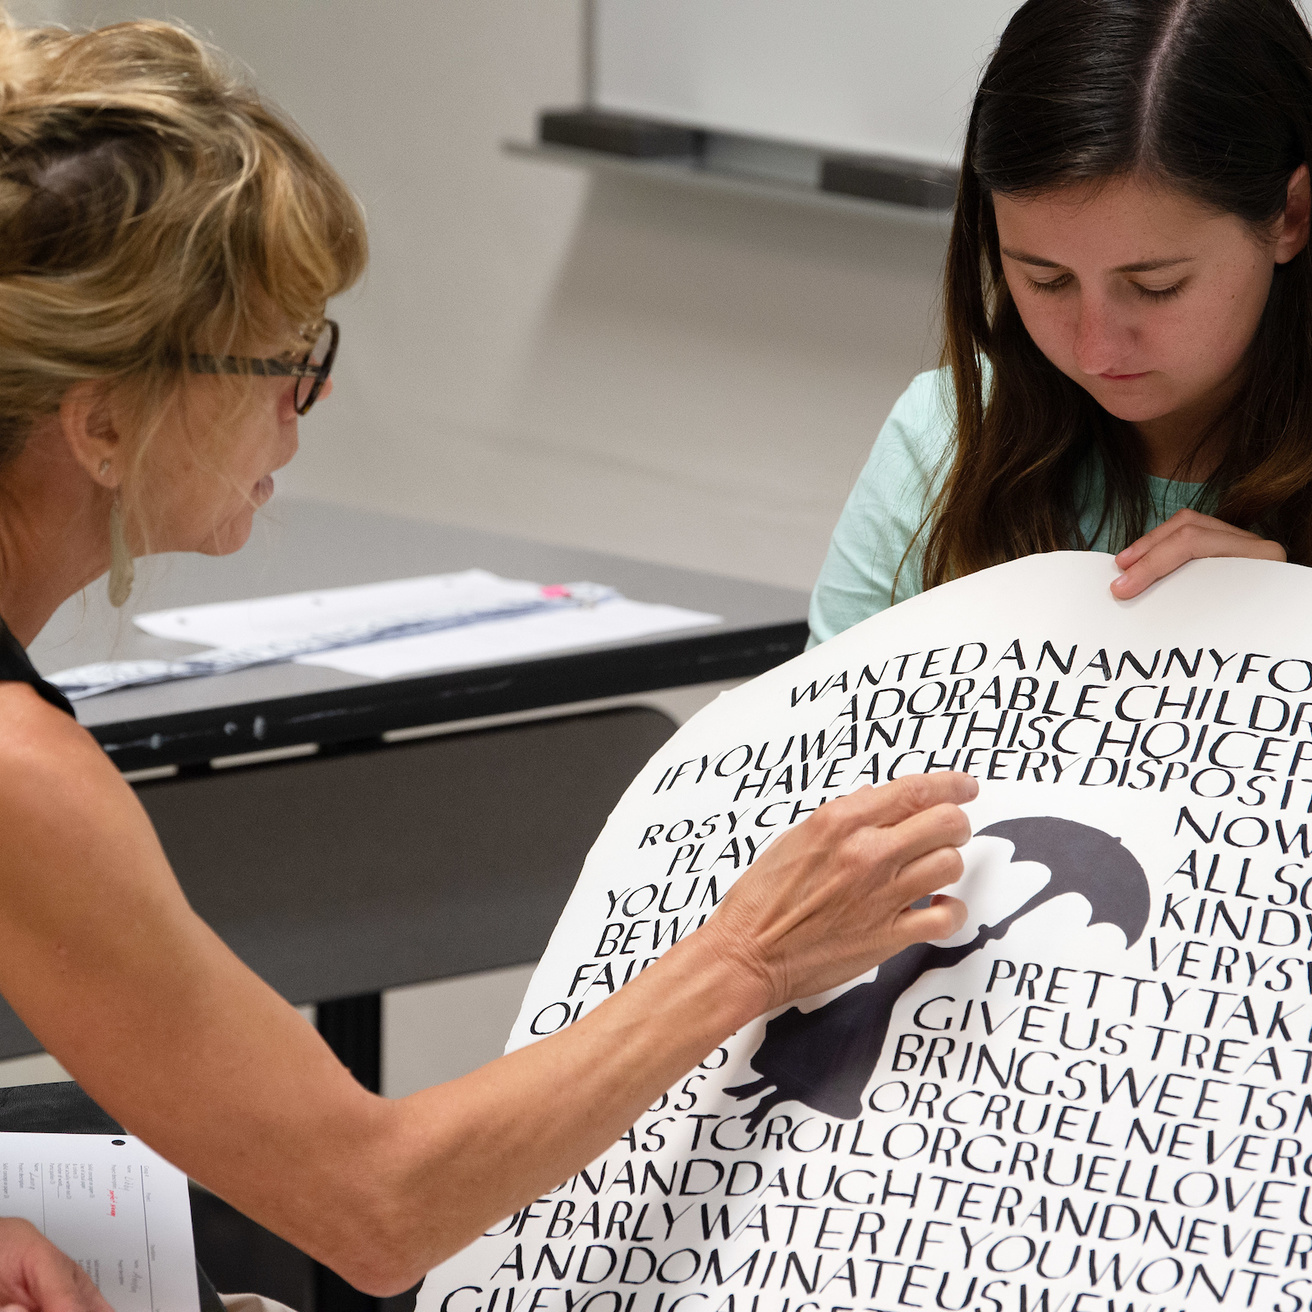 A woman holds up a poster with calligraphy on it and another woman examines it